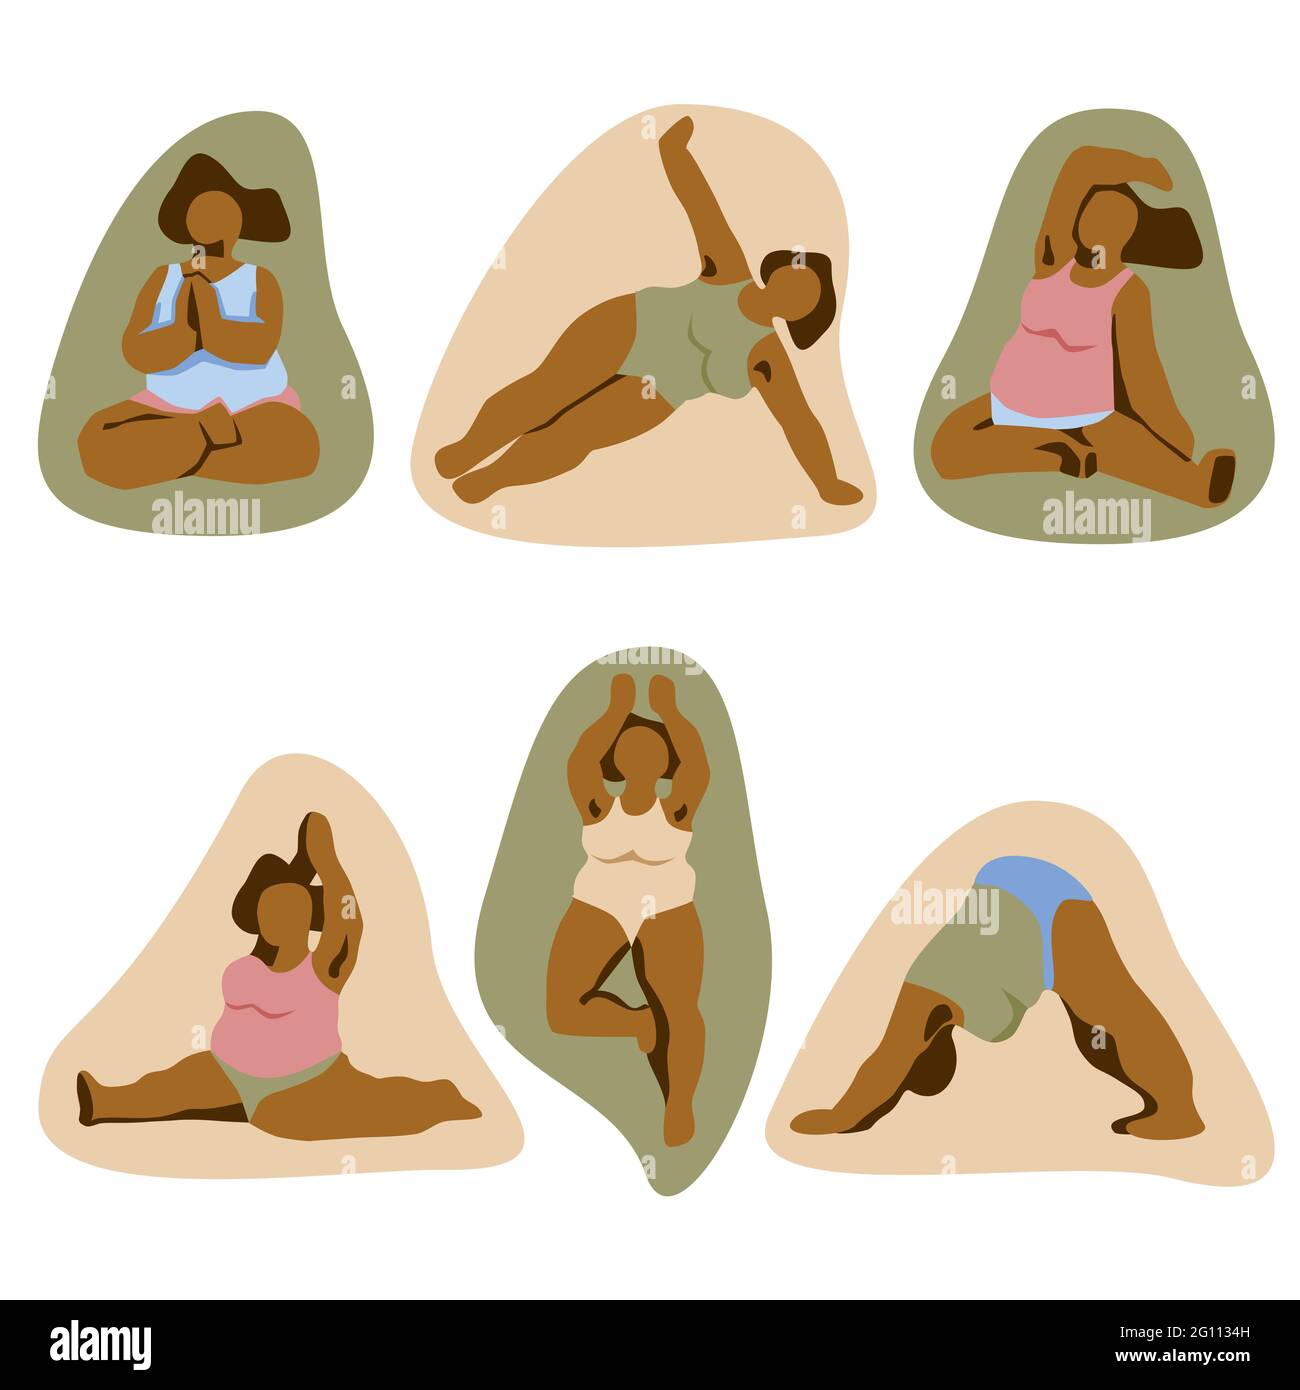 Plus size abstract woman workout in yoga poses. Bodypositive lady icons set. Active overweight girl. Up dog, lotus, monkey yoga poses vector illustrat Stock Vector